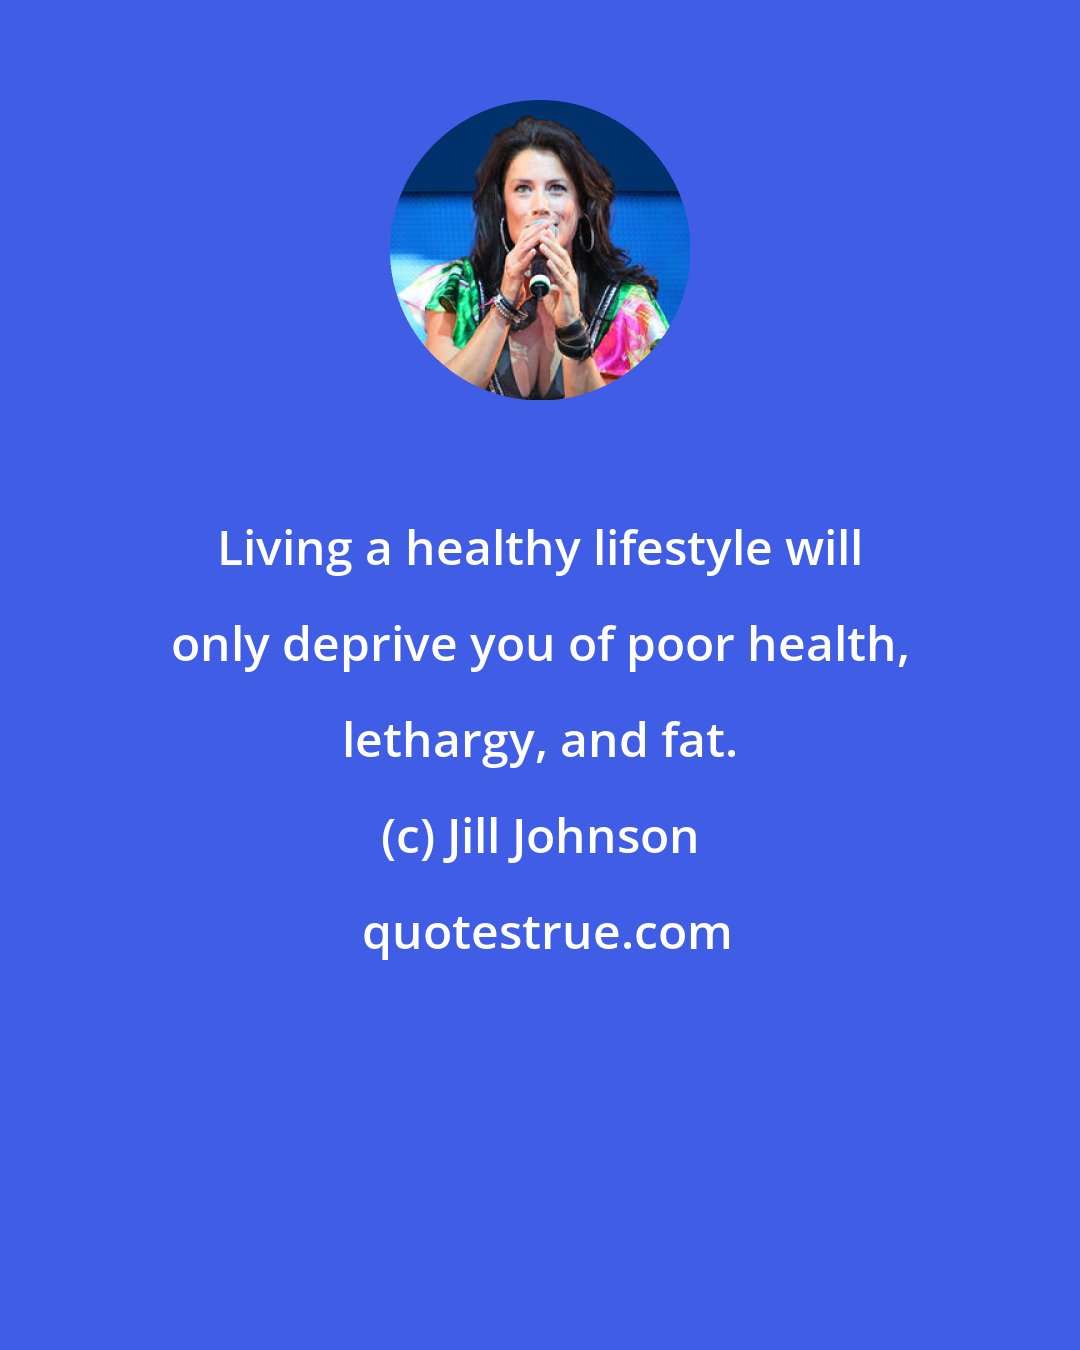 Jill Johnson: Living a healthy lifestyle will only deprive you of poor health, lethargy, and fat.